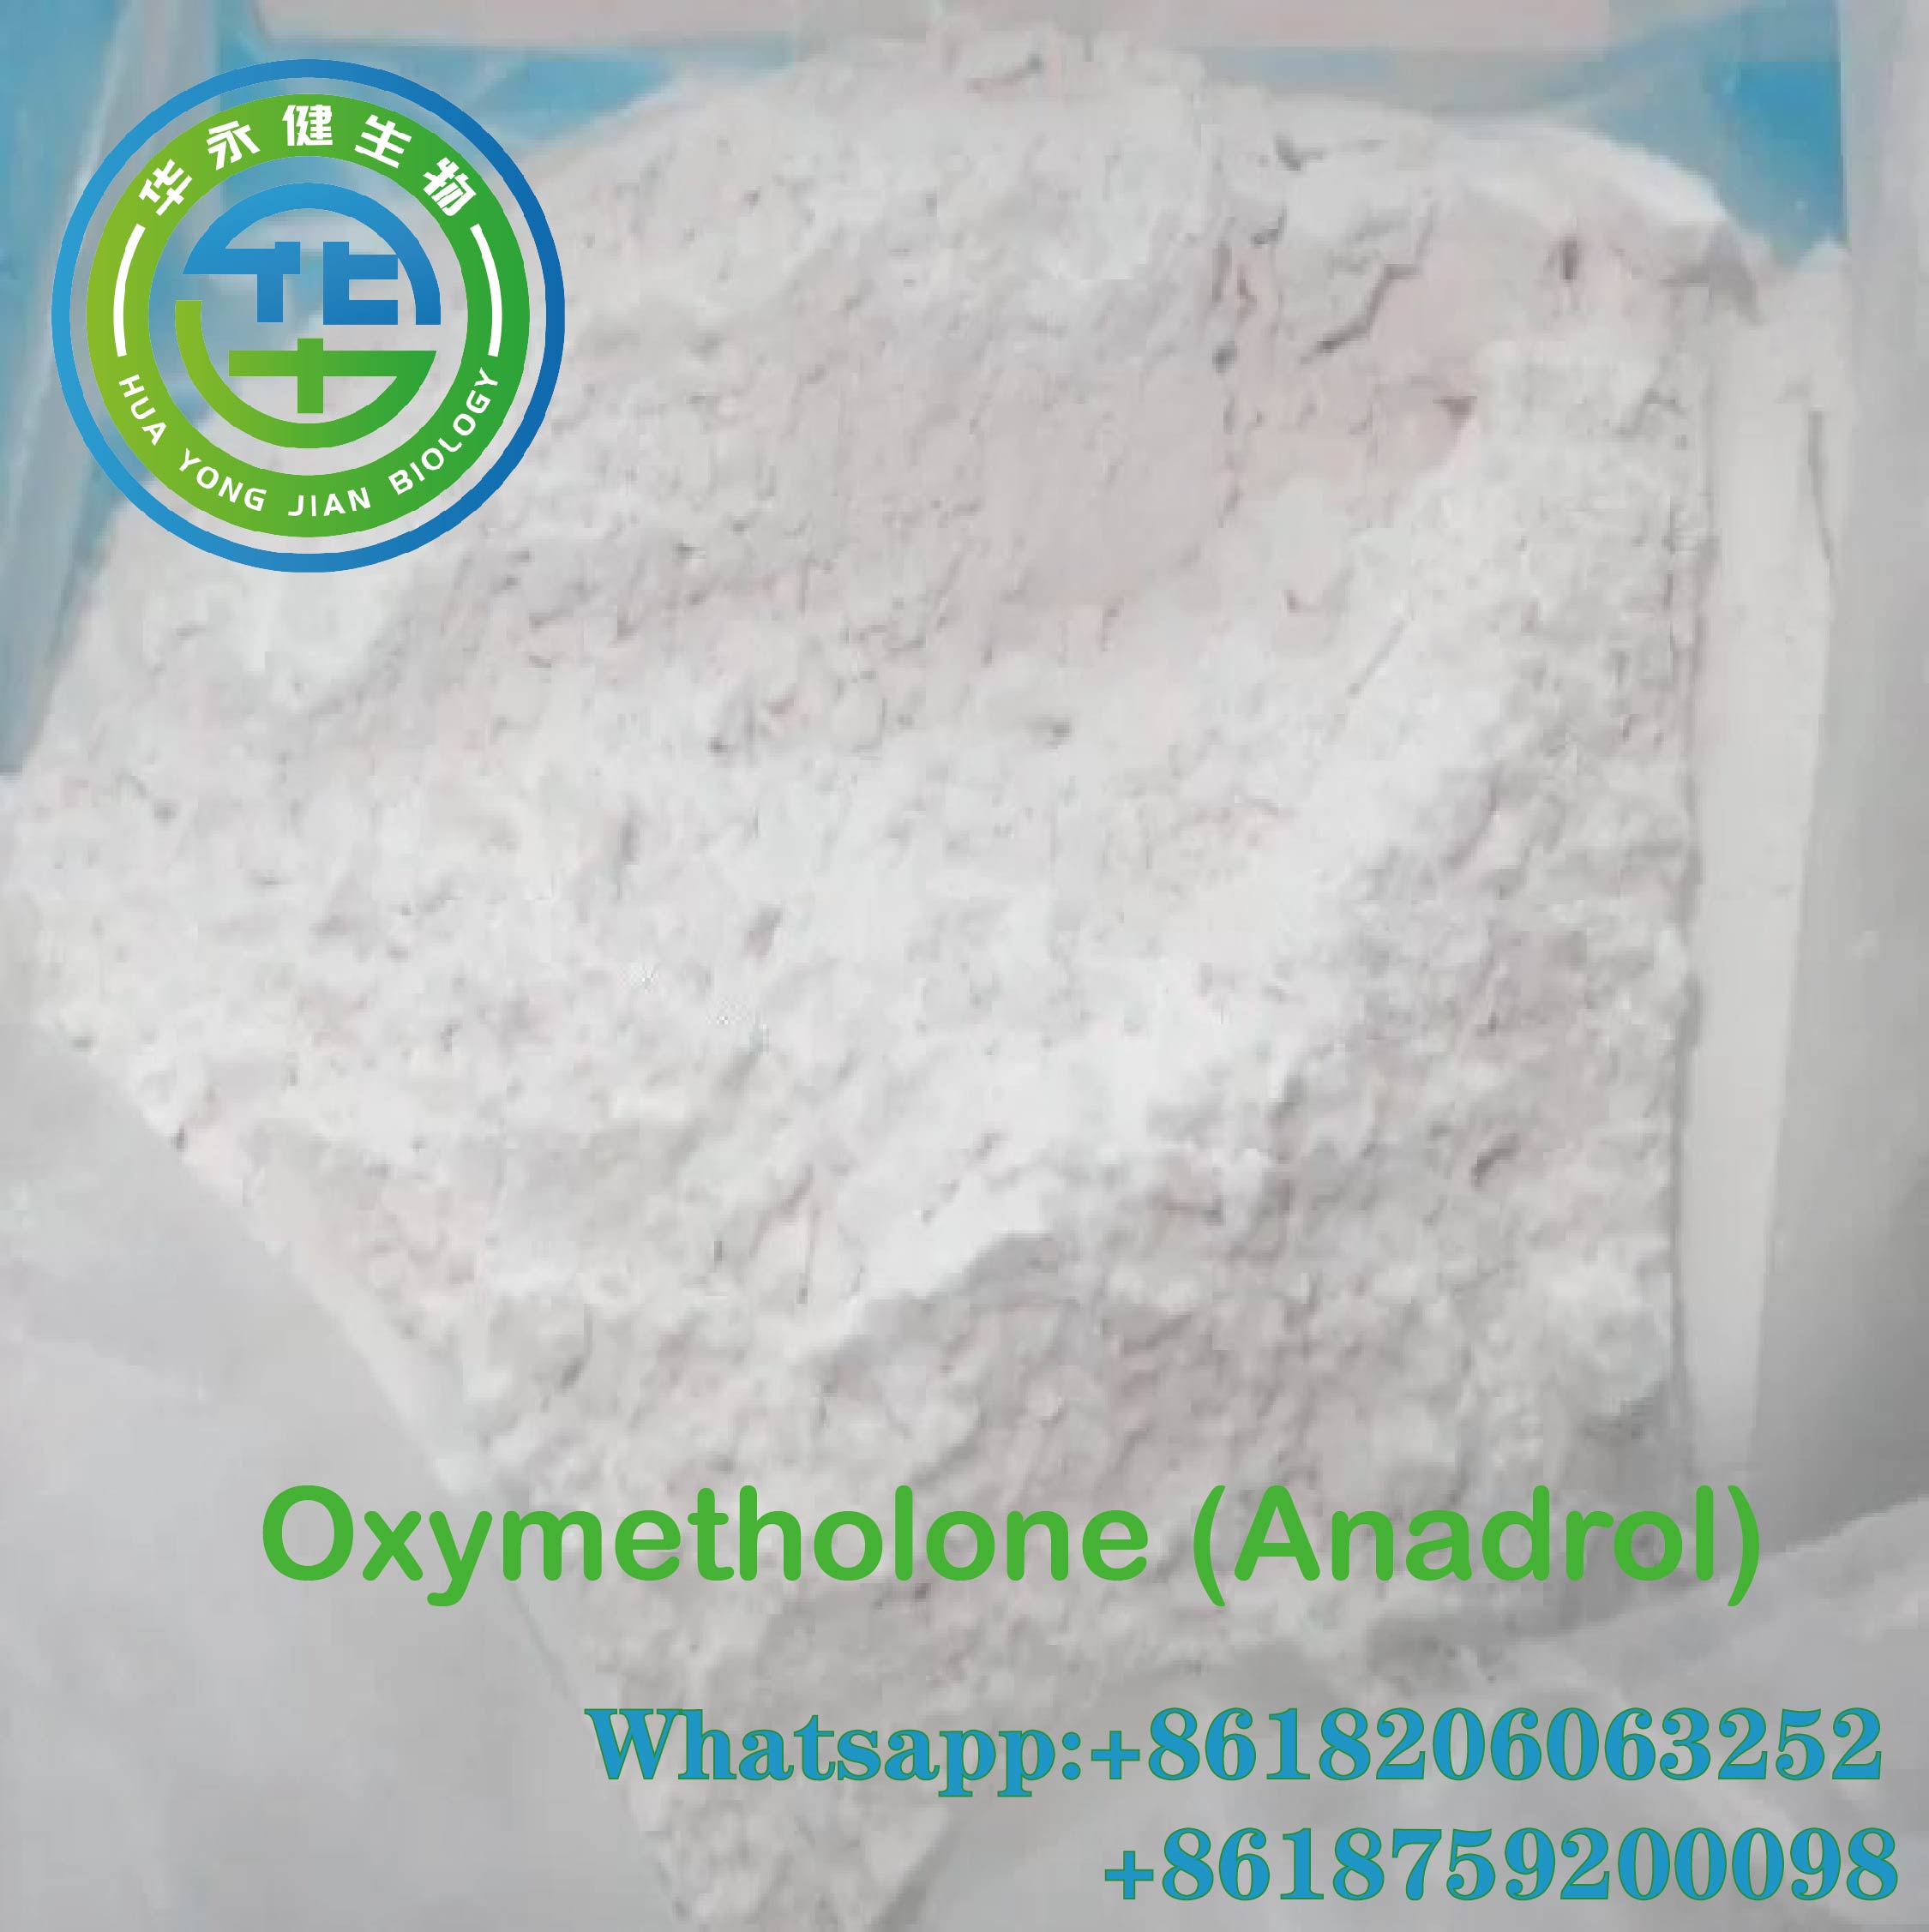 Pharmaceutical Grade Pain Relief Powder Oxymetholone (Anadrol) CAS 434-07-1 Featured Image